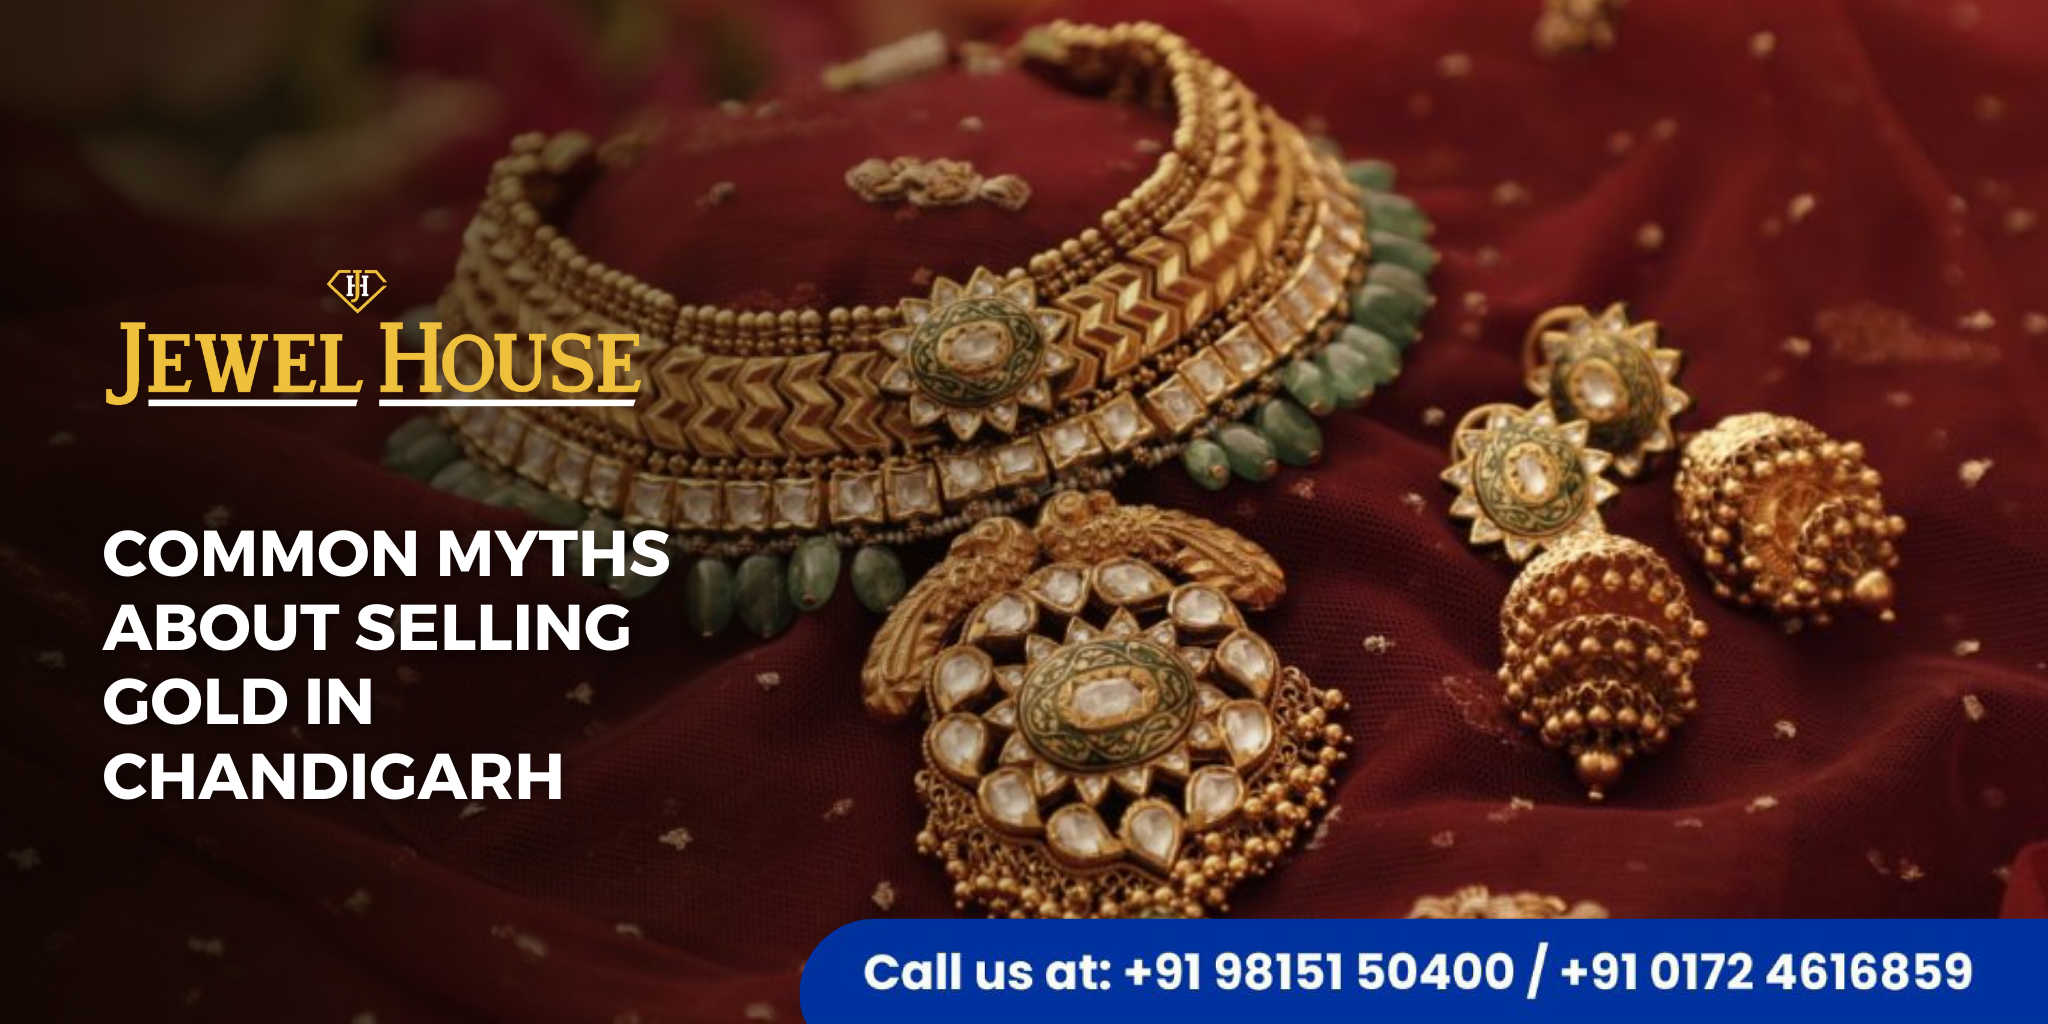 Myths About Selling Gold in Chandigarh